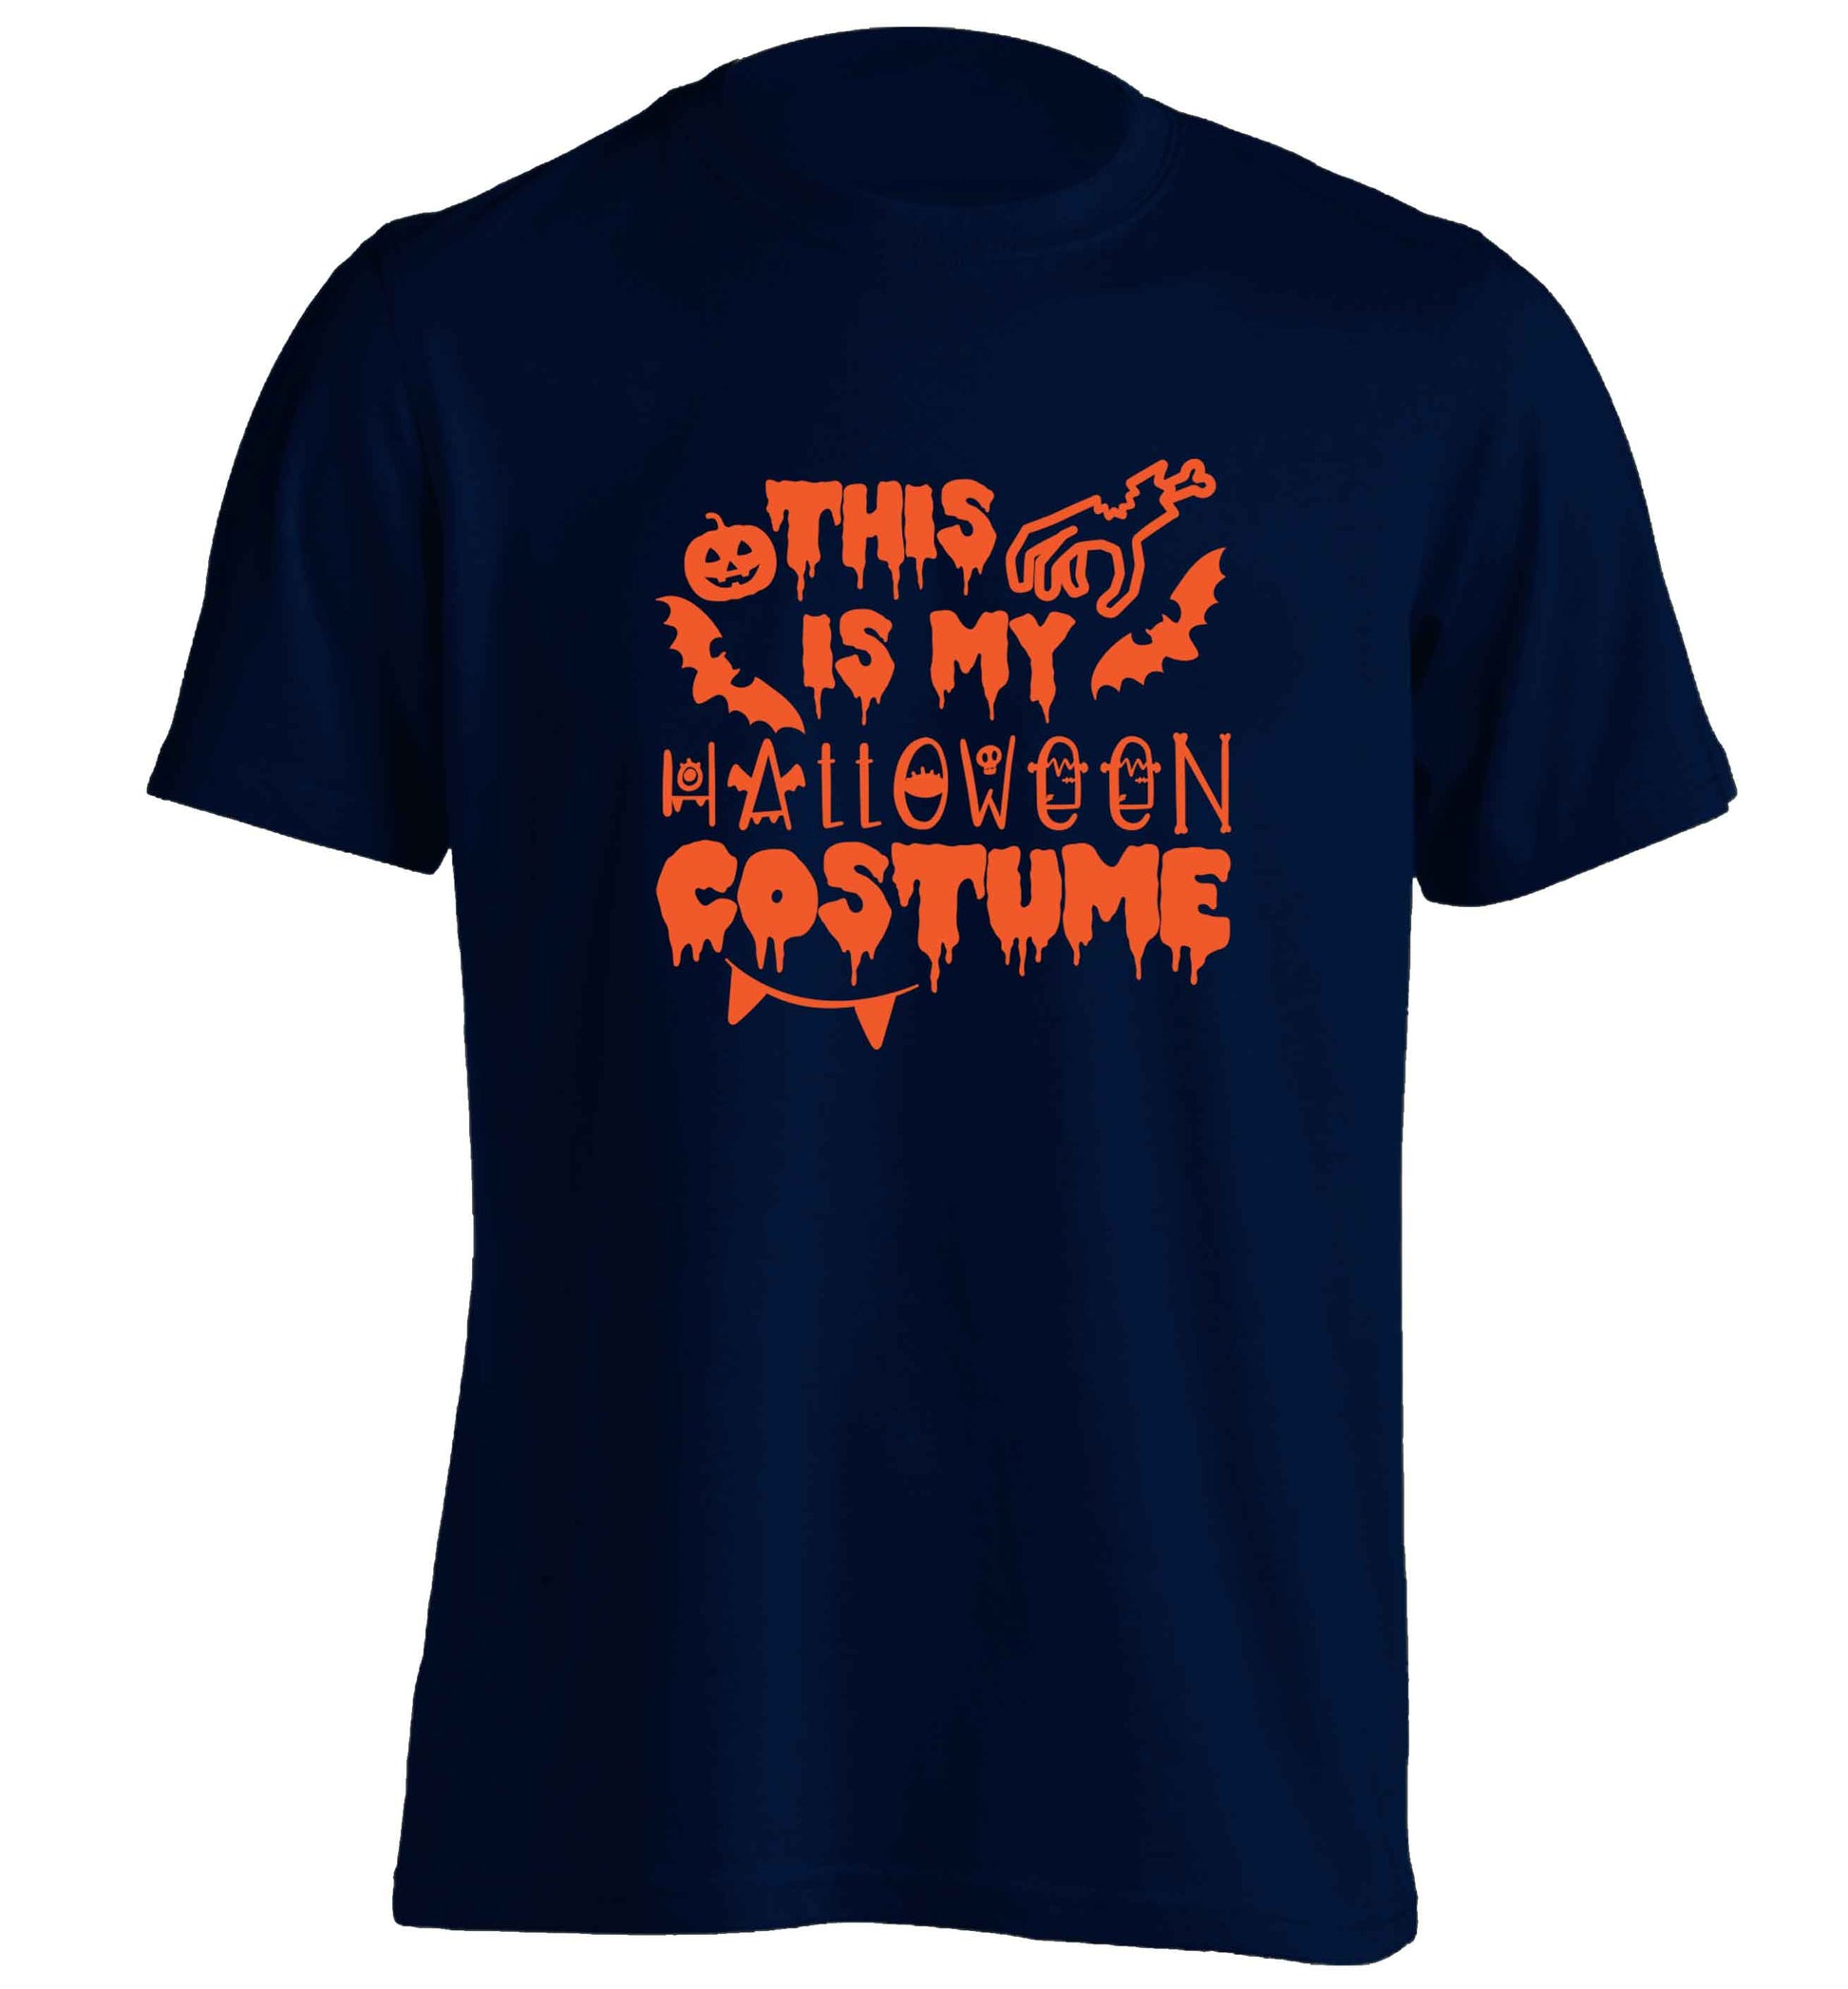 This is my halloween costume adults unisex navy Tshirt 2XL